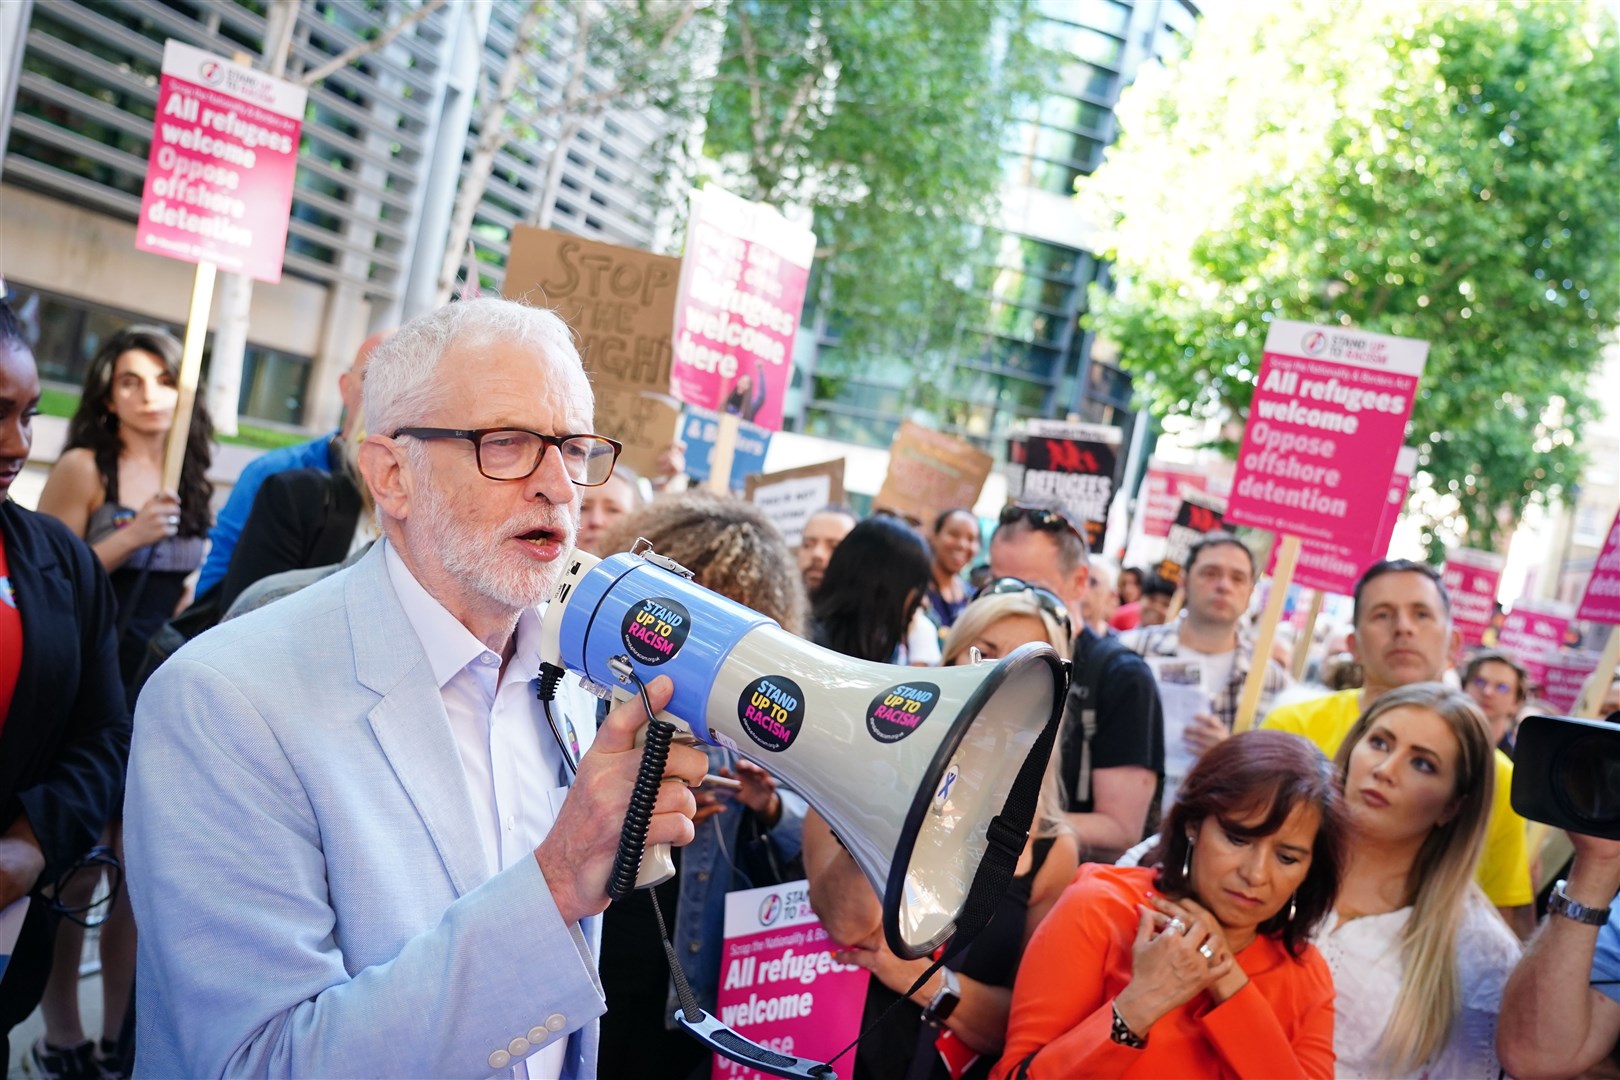 Jeremy Corbyn was among the demonstrators outside the Home Office (PA)